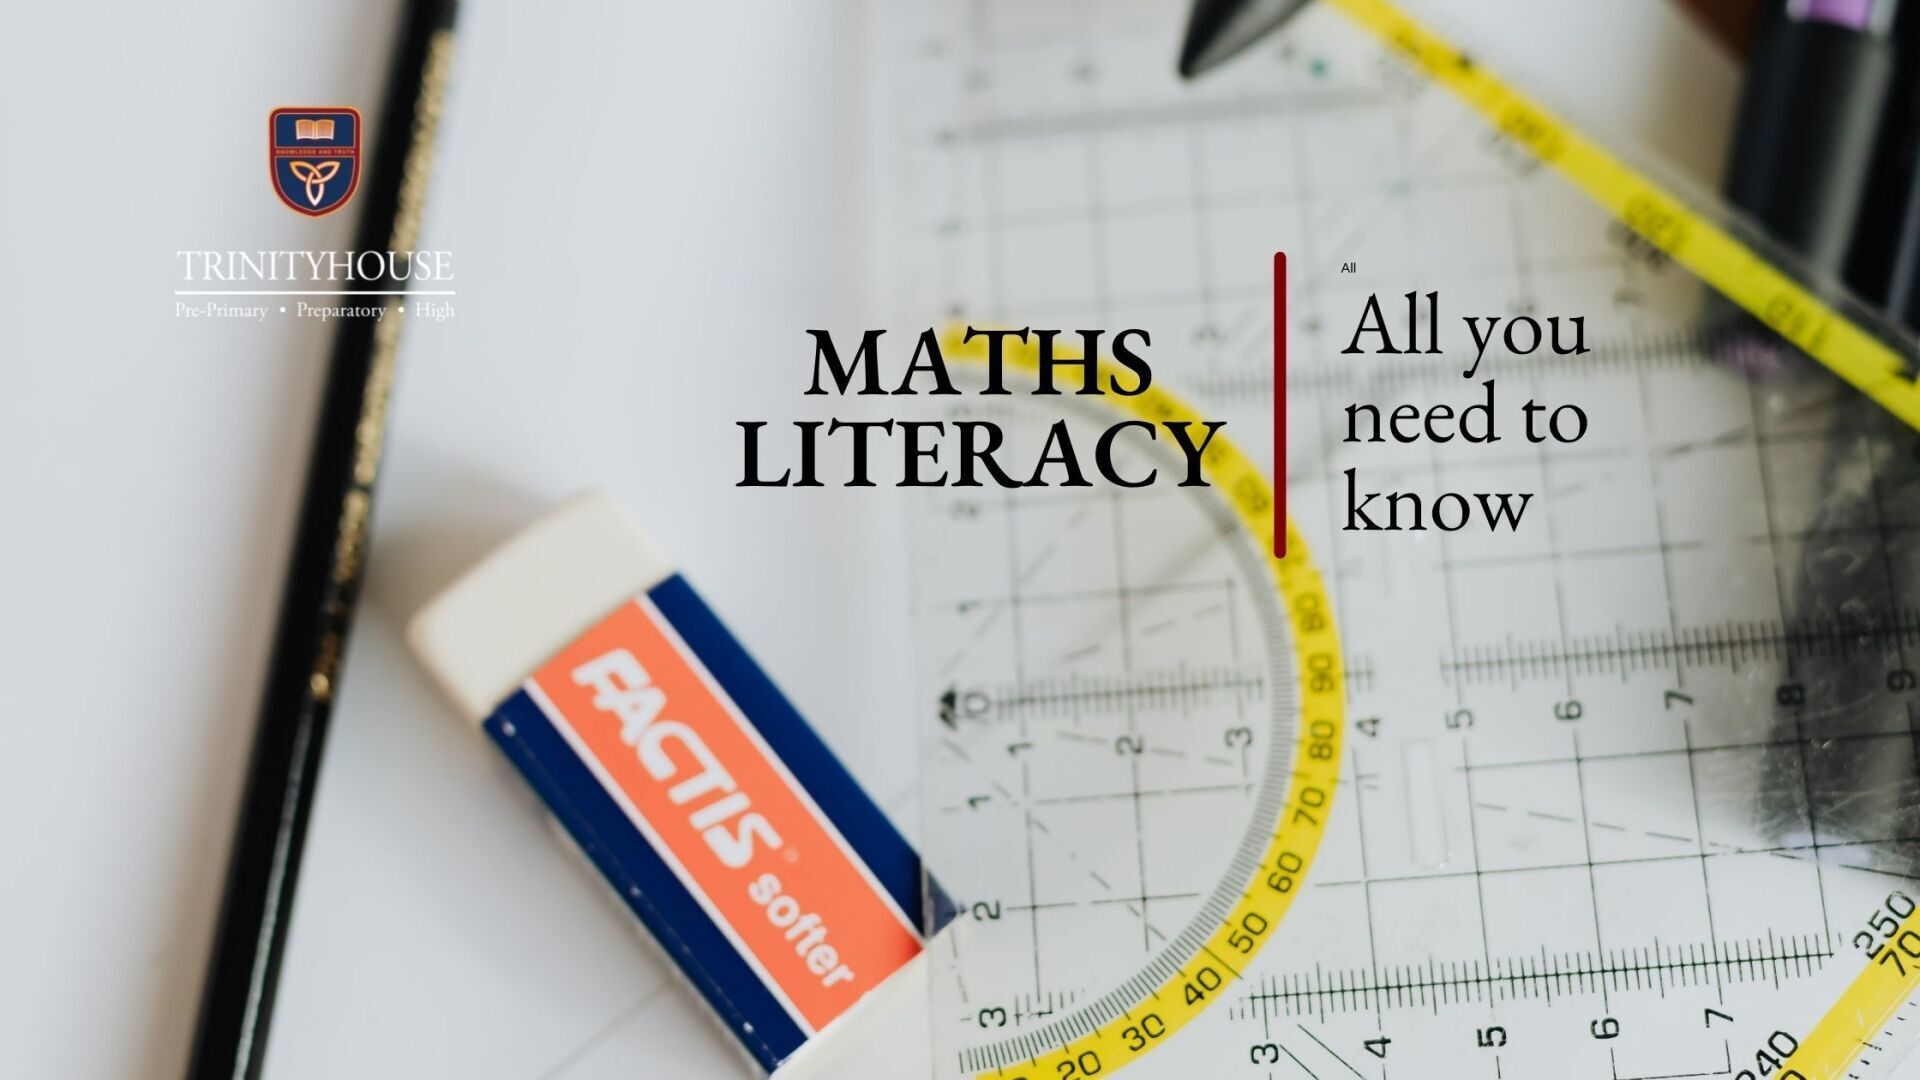 What You Need To Know About Maths Literacy